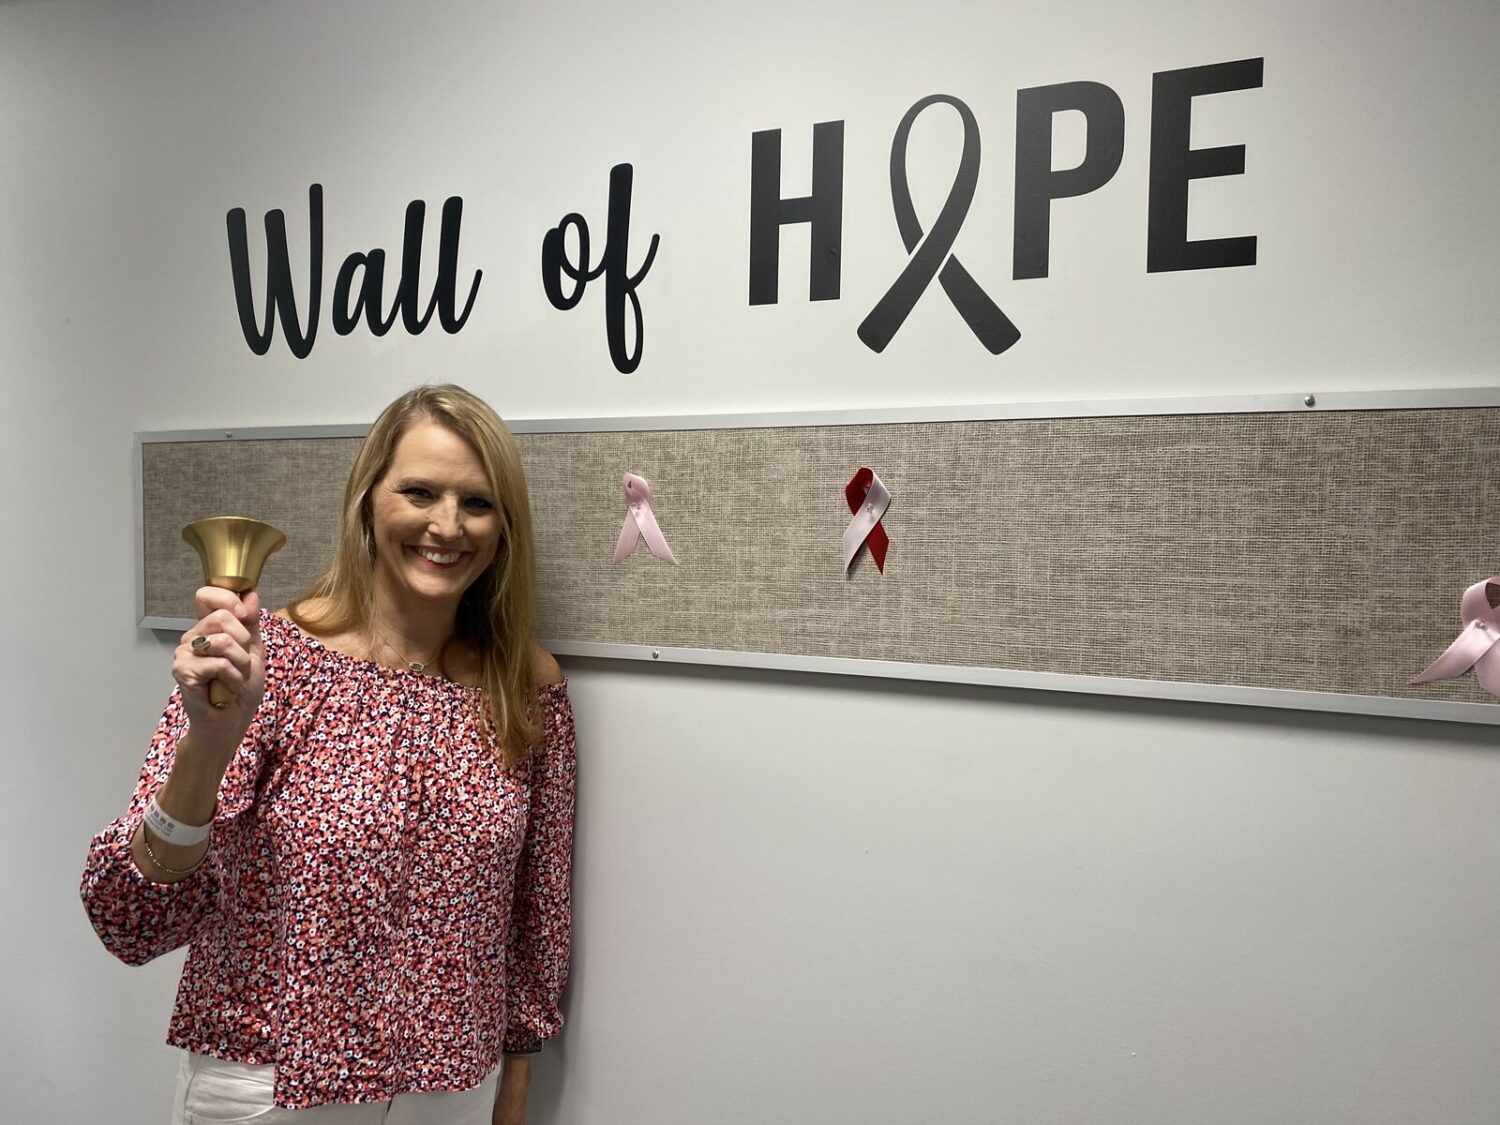 Allyson Floyd rings bell at Wall of Hope after surviving breast cancer (Credit: Allyson Floyd)